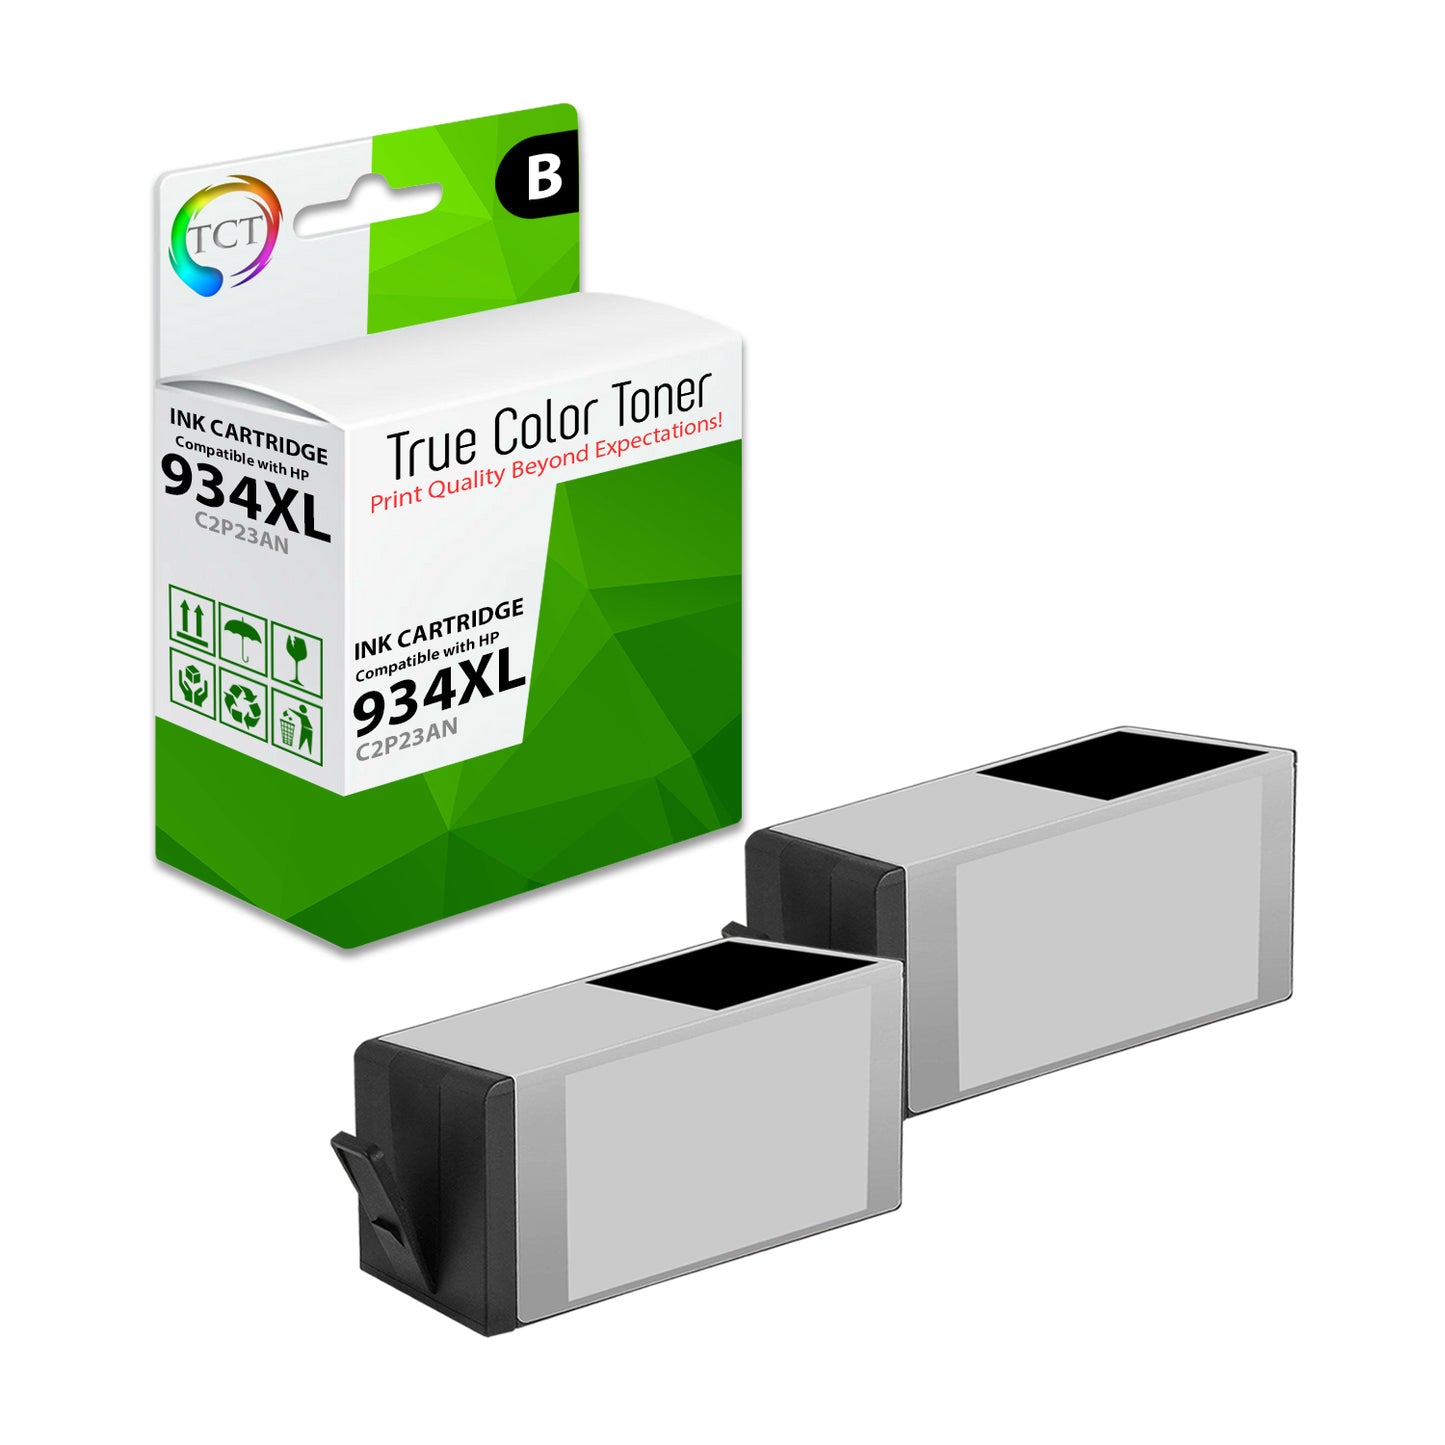 TCT Compatible Ink Cartridge Replacement for the HP 934XL Series - 2 Pack Black